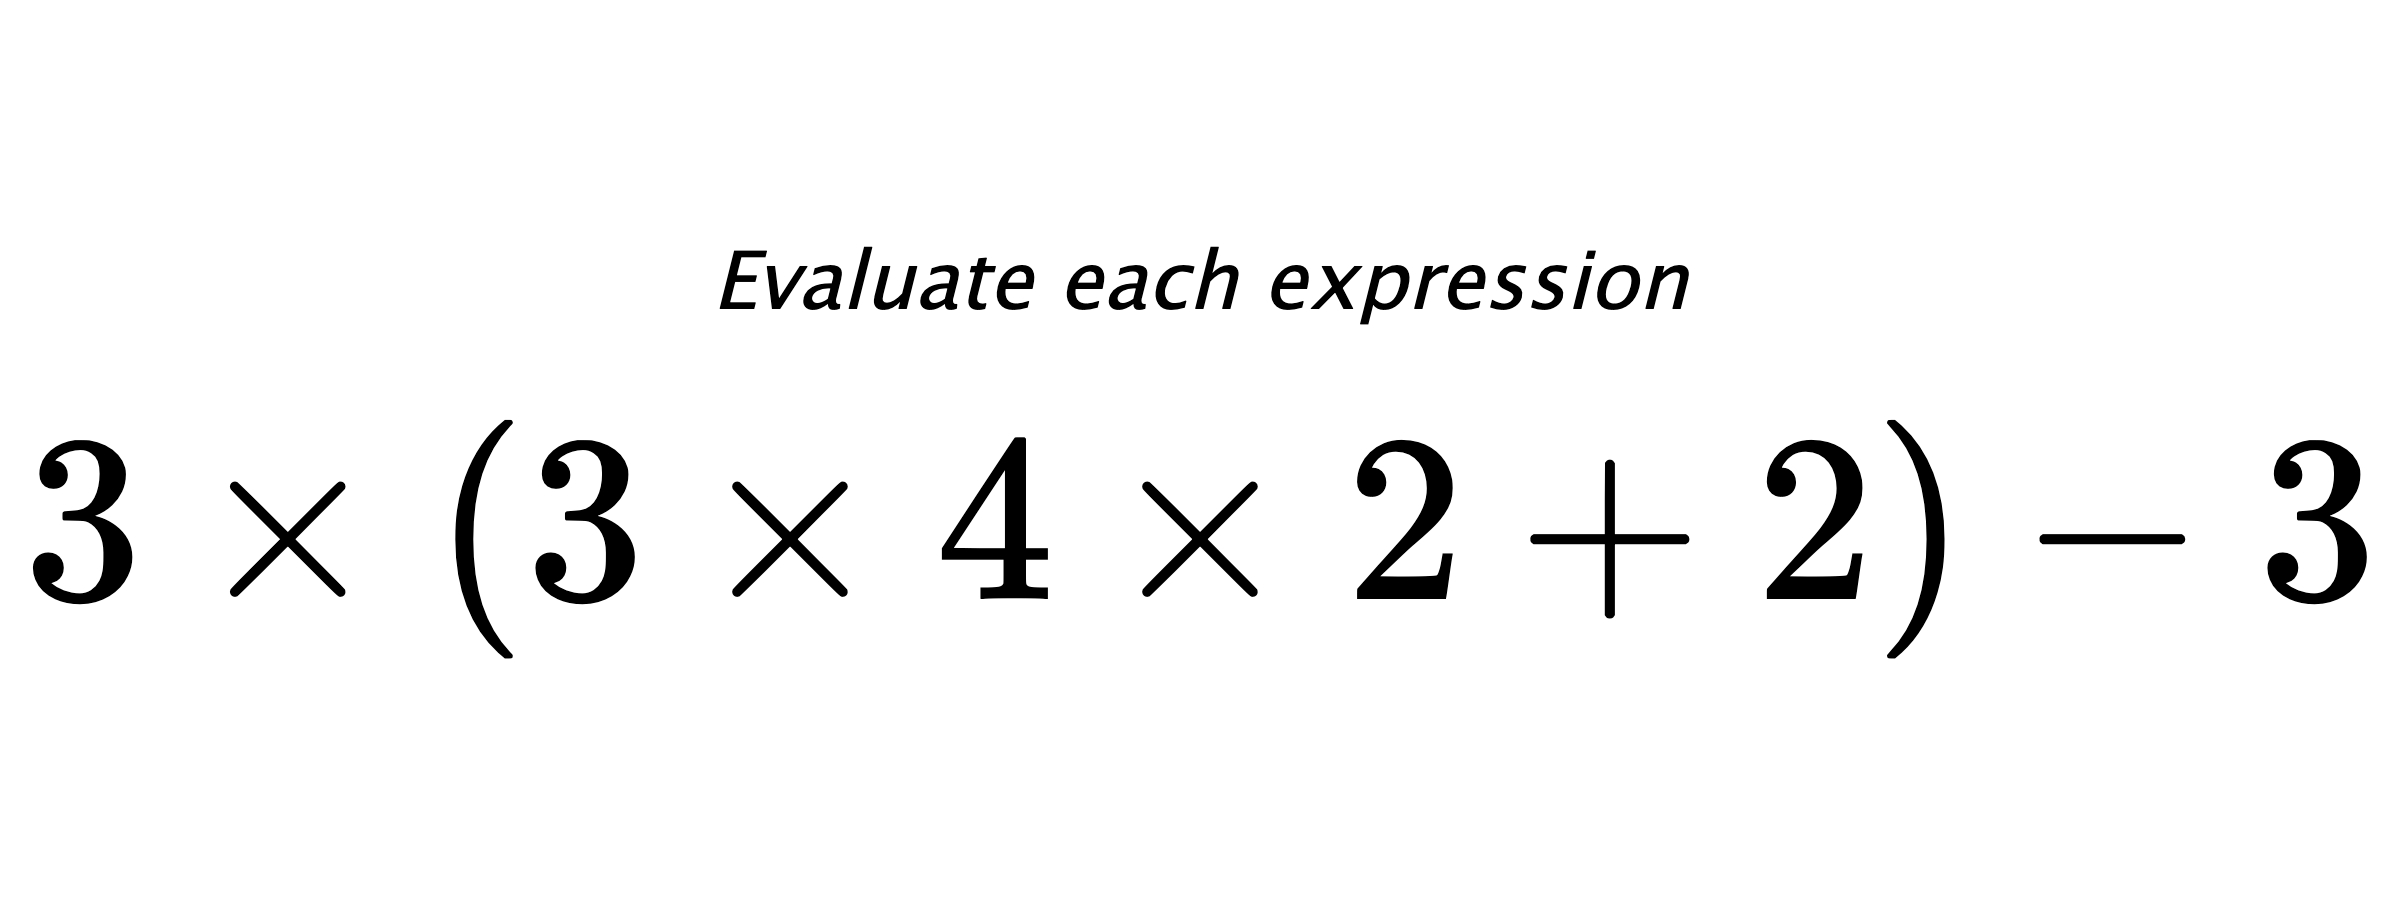 Evaluate each expression $ 3 \times (3 \times 4 \times 2 +2) - 3 $